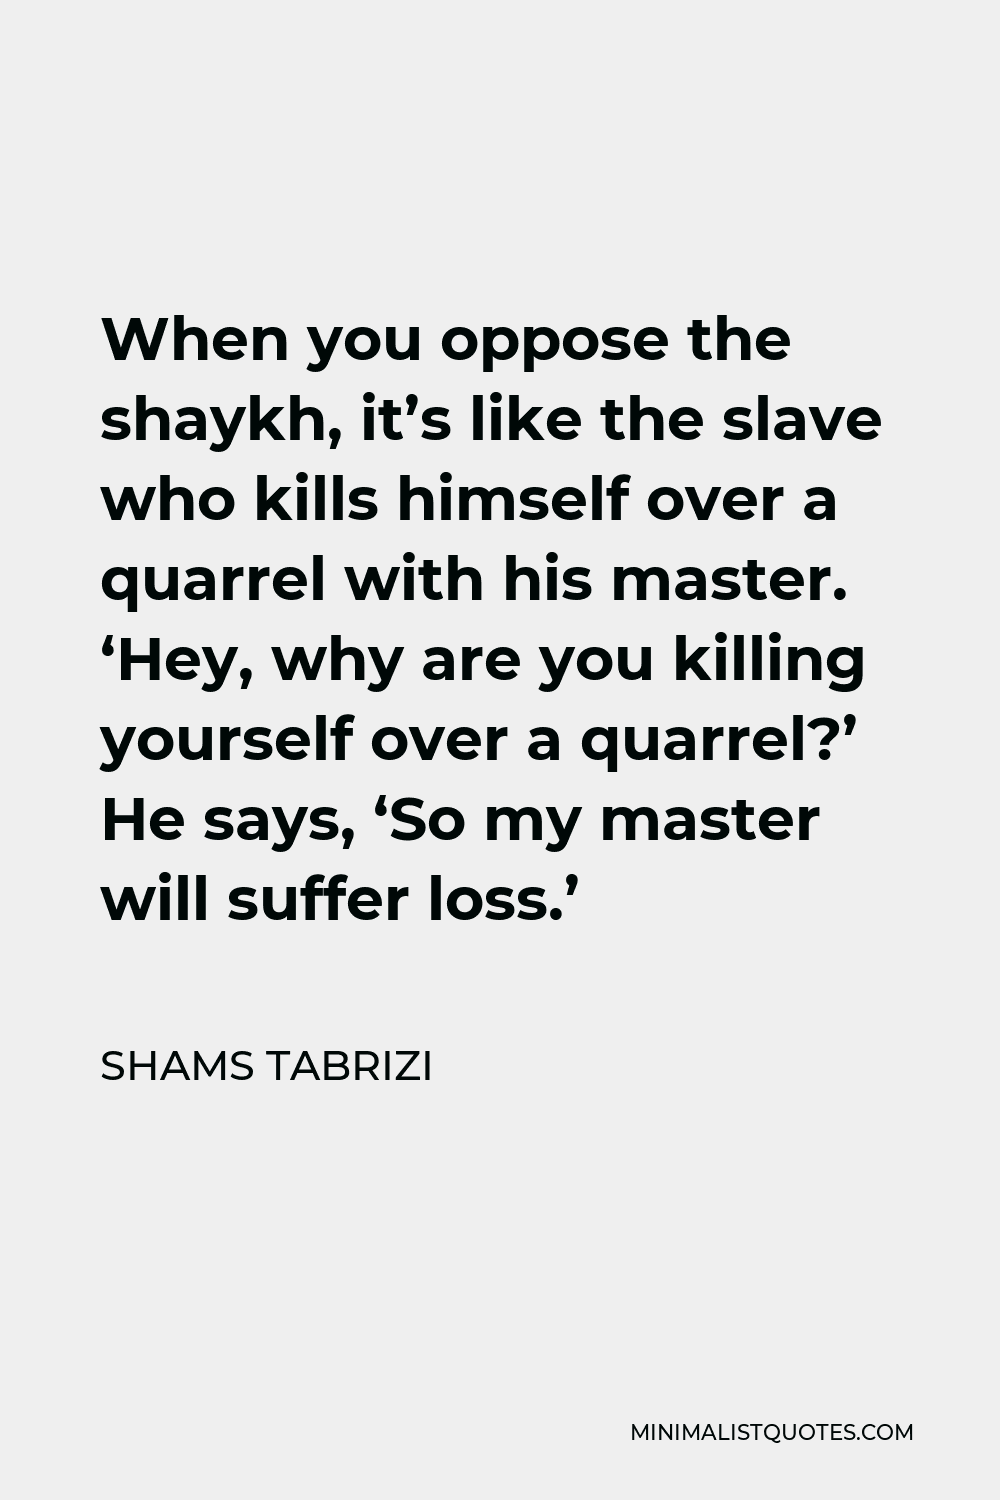 Shams Tabrizi Quote - When you oppose the shaykh, it’s like the slave who kills himself over a quarrel with his master. ‘Hey, why are you killing yourself over a quarrel?’ He says, ‘So my master will suffer loss.’